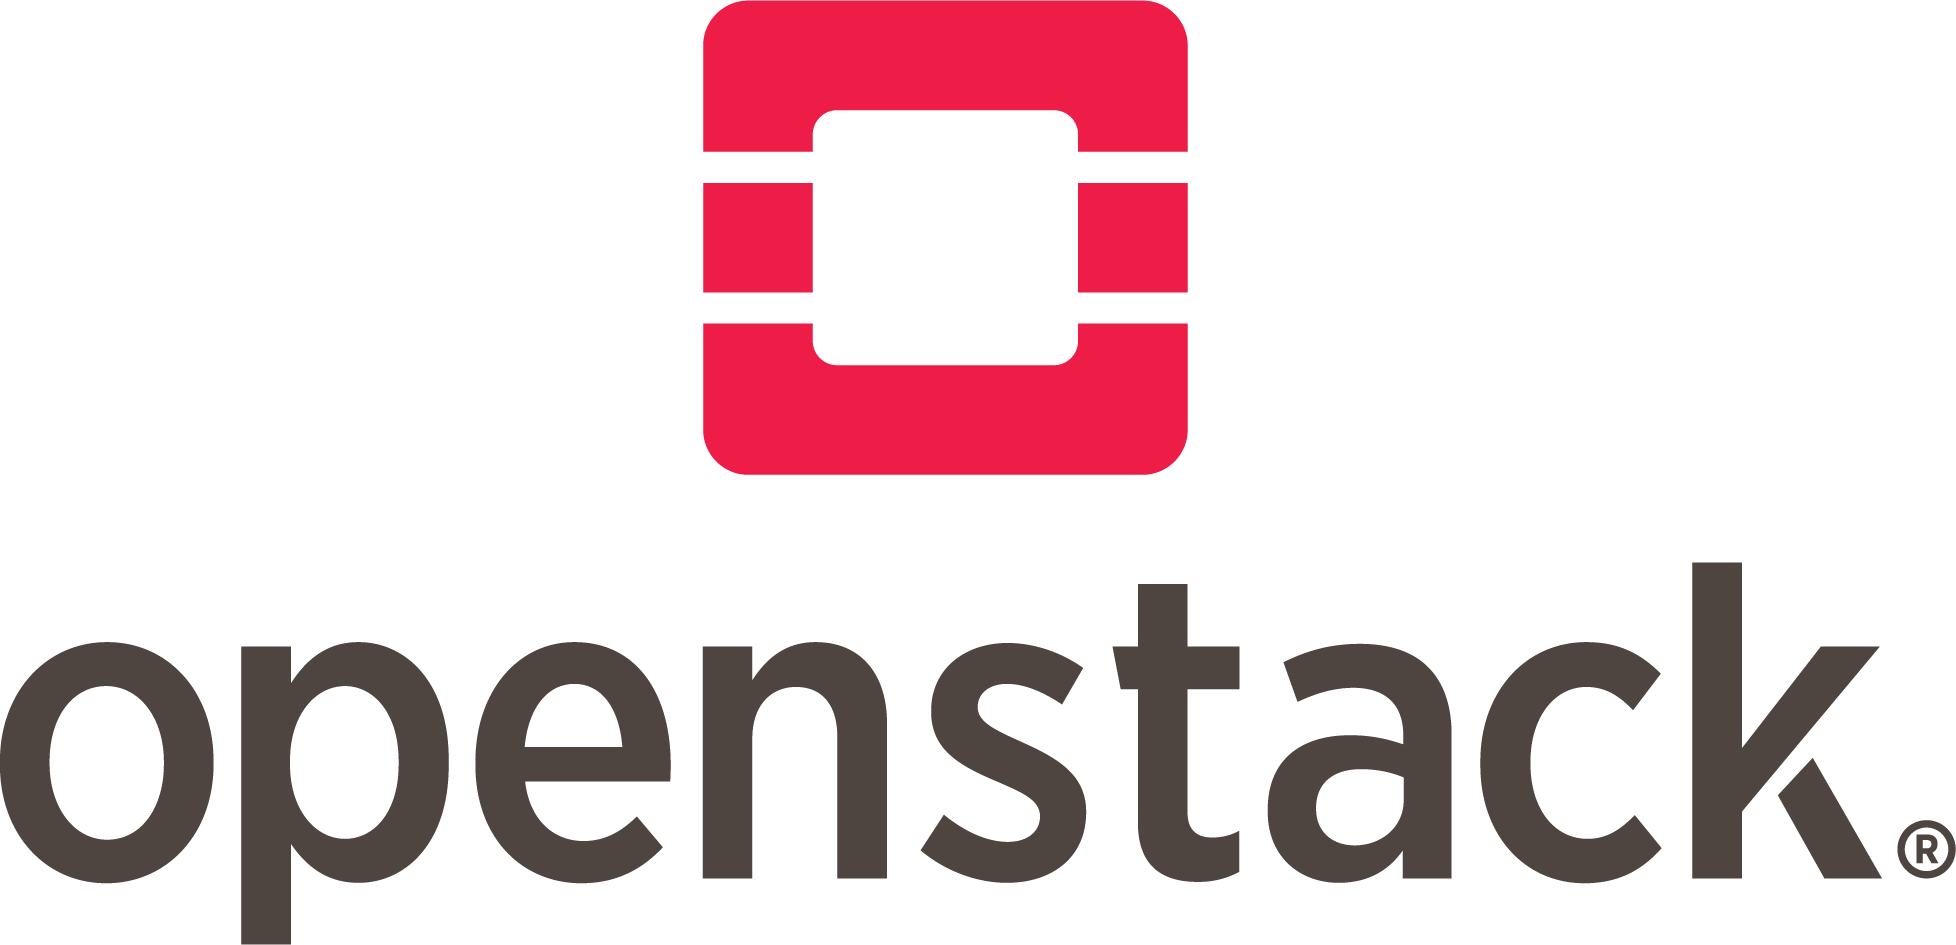 OpenStack Logo - Download The OpenStack Logo - OpenStack is open source software for ...